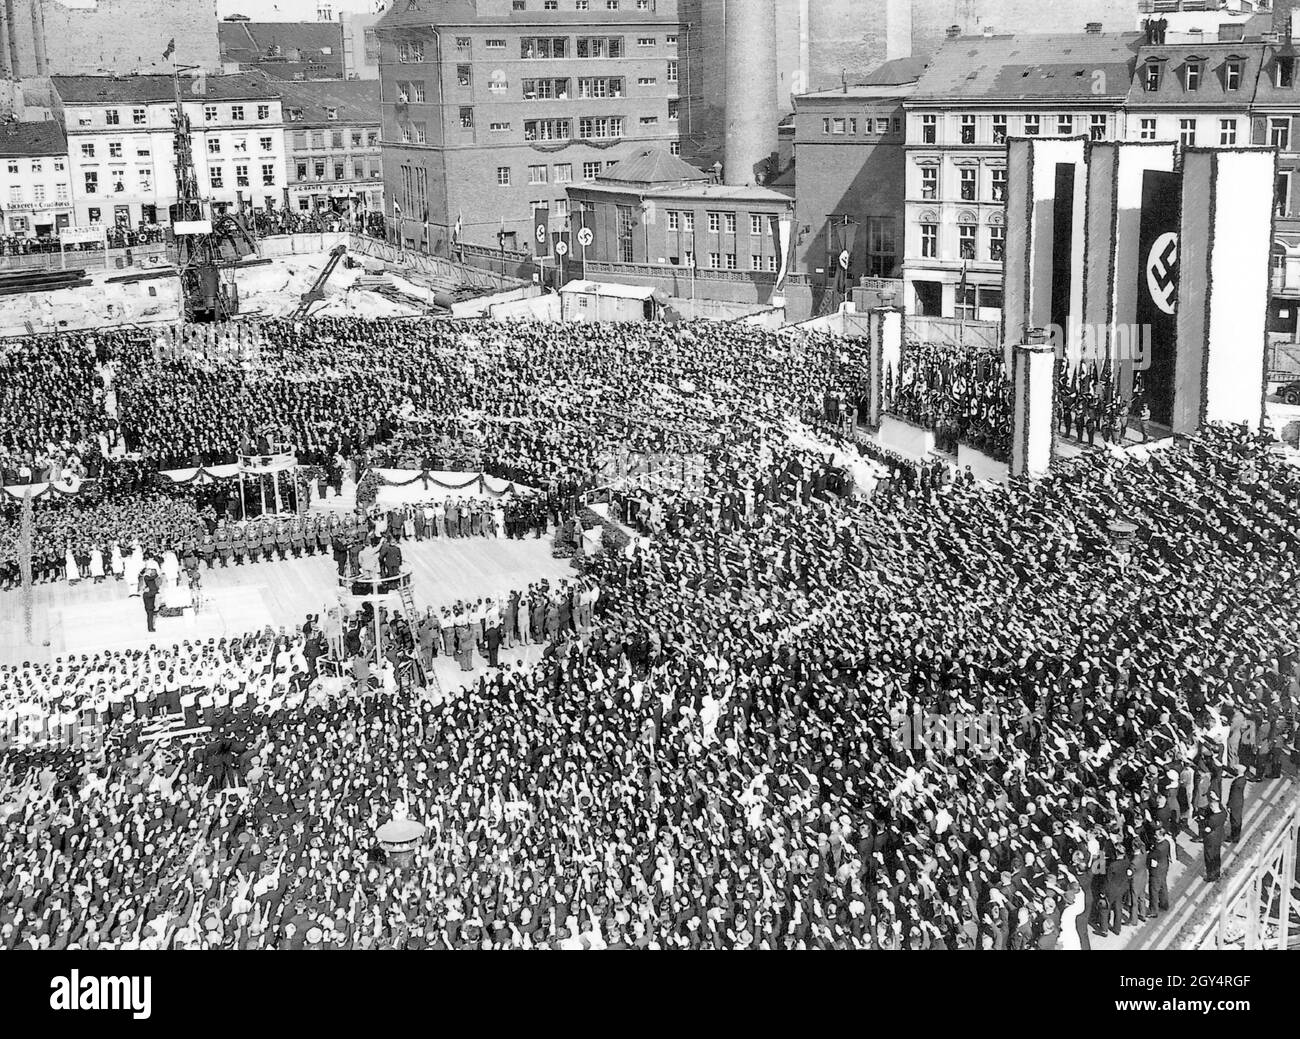 'On May 5, 1934, the cornerstone was laid for the house on Werderscher Markt, which served as an extension to the Reichsbank. A crowd of people saluting Hitler attends the event, including sections of Nazi organizations such as the Hitler Youth and the Bund Deutscher Mädel (left in the picture). The ''Deutschlandlied'' is being played. Two round, raised platforms have been erected especially for the picture and film press. Adolf Hitler and Hjalmar Schacht were present at the ceremony. [automated translation]' Stock Photo